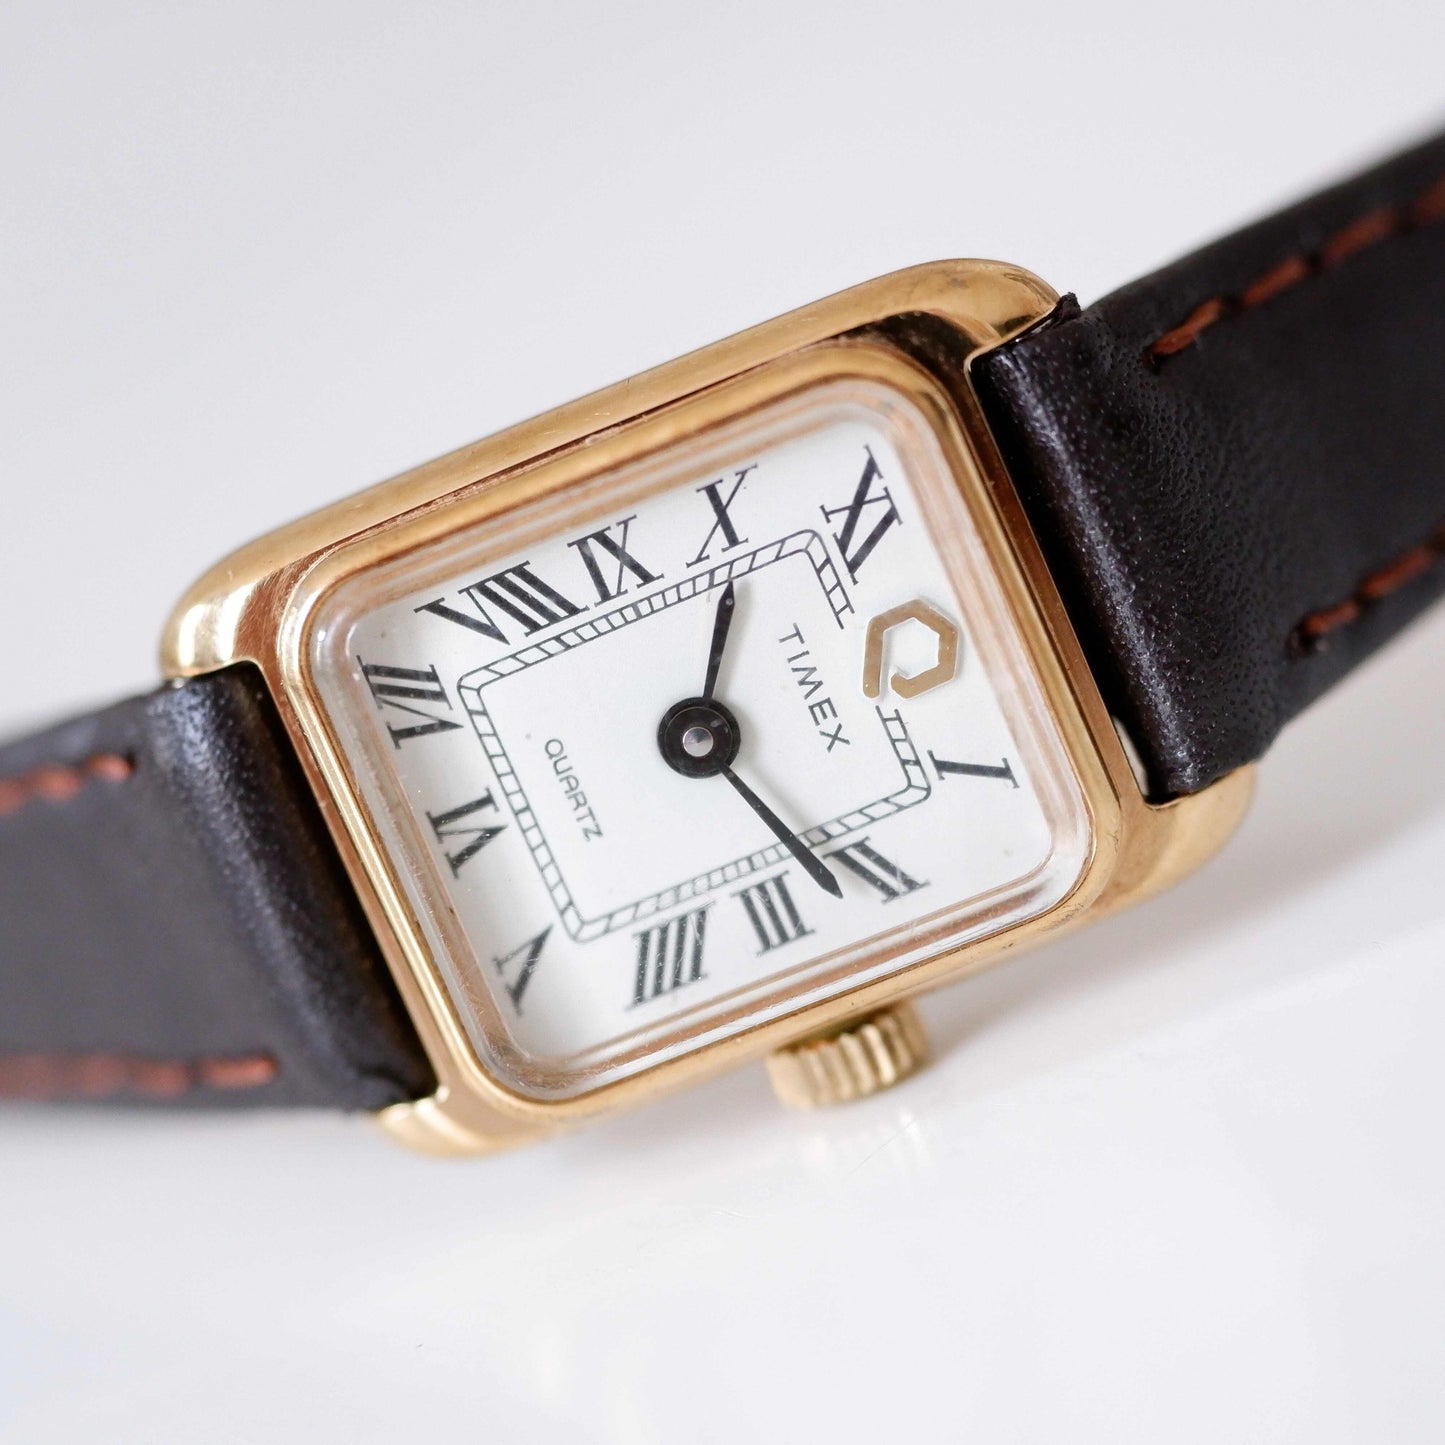 Times Vintage Ladies Watch, Second Front Side